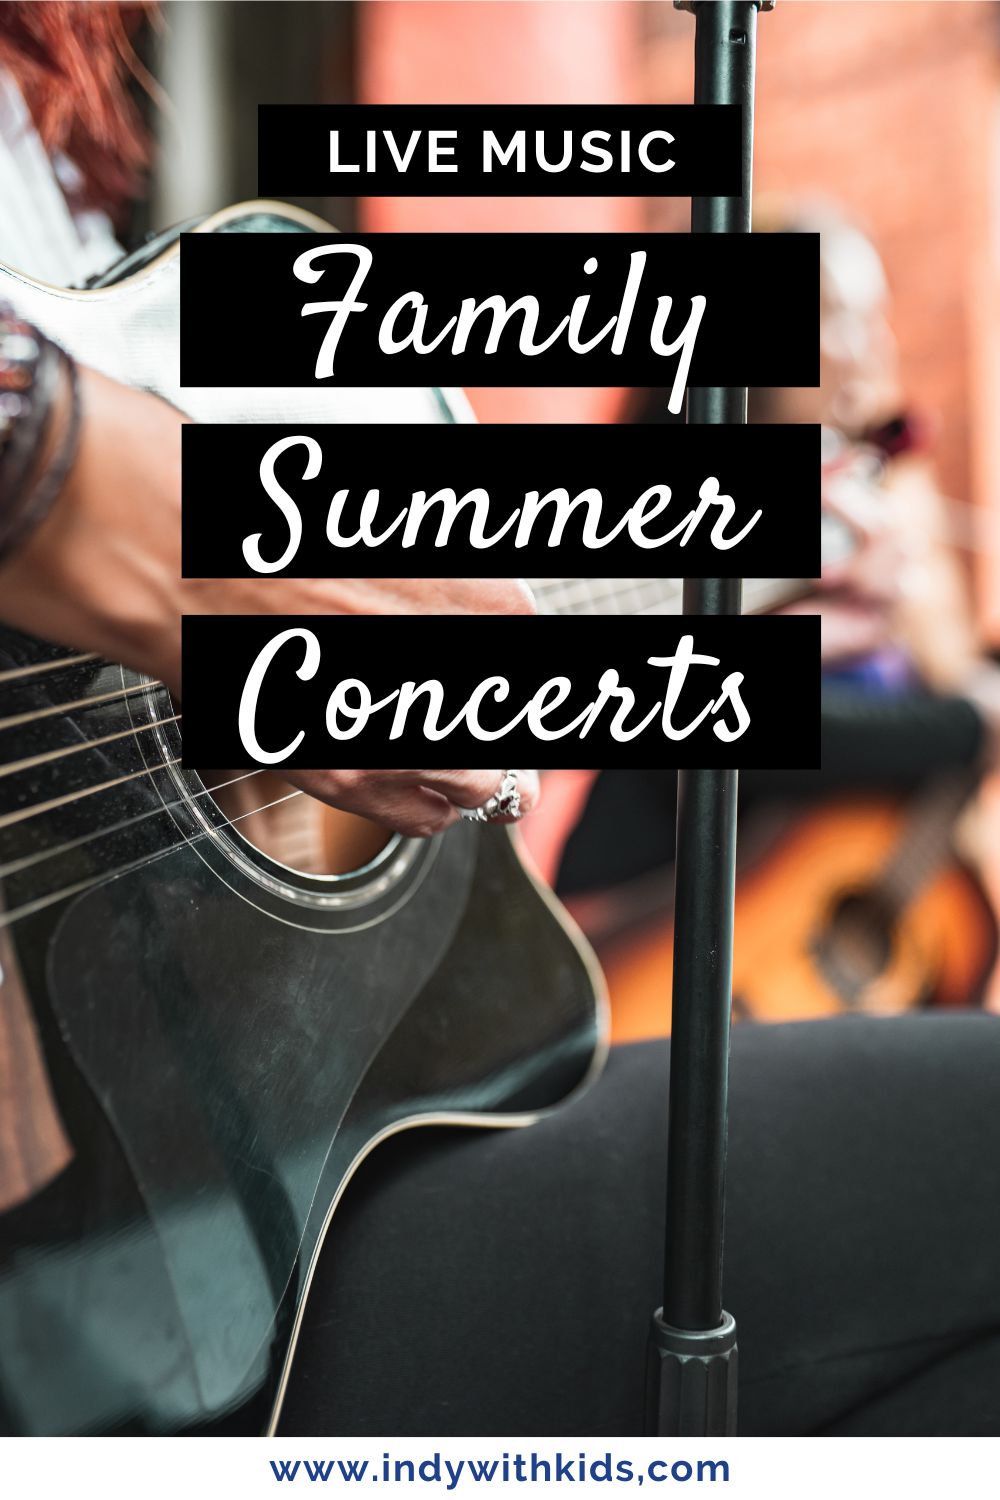 Catch family-friendly Indianapolis concerts all summer long.